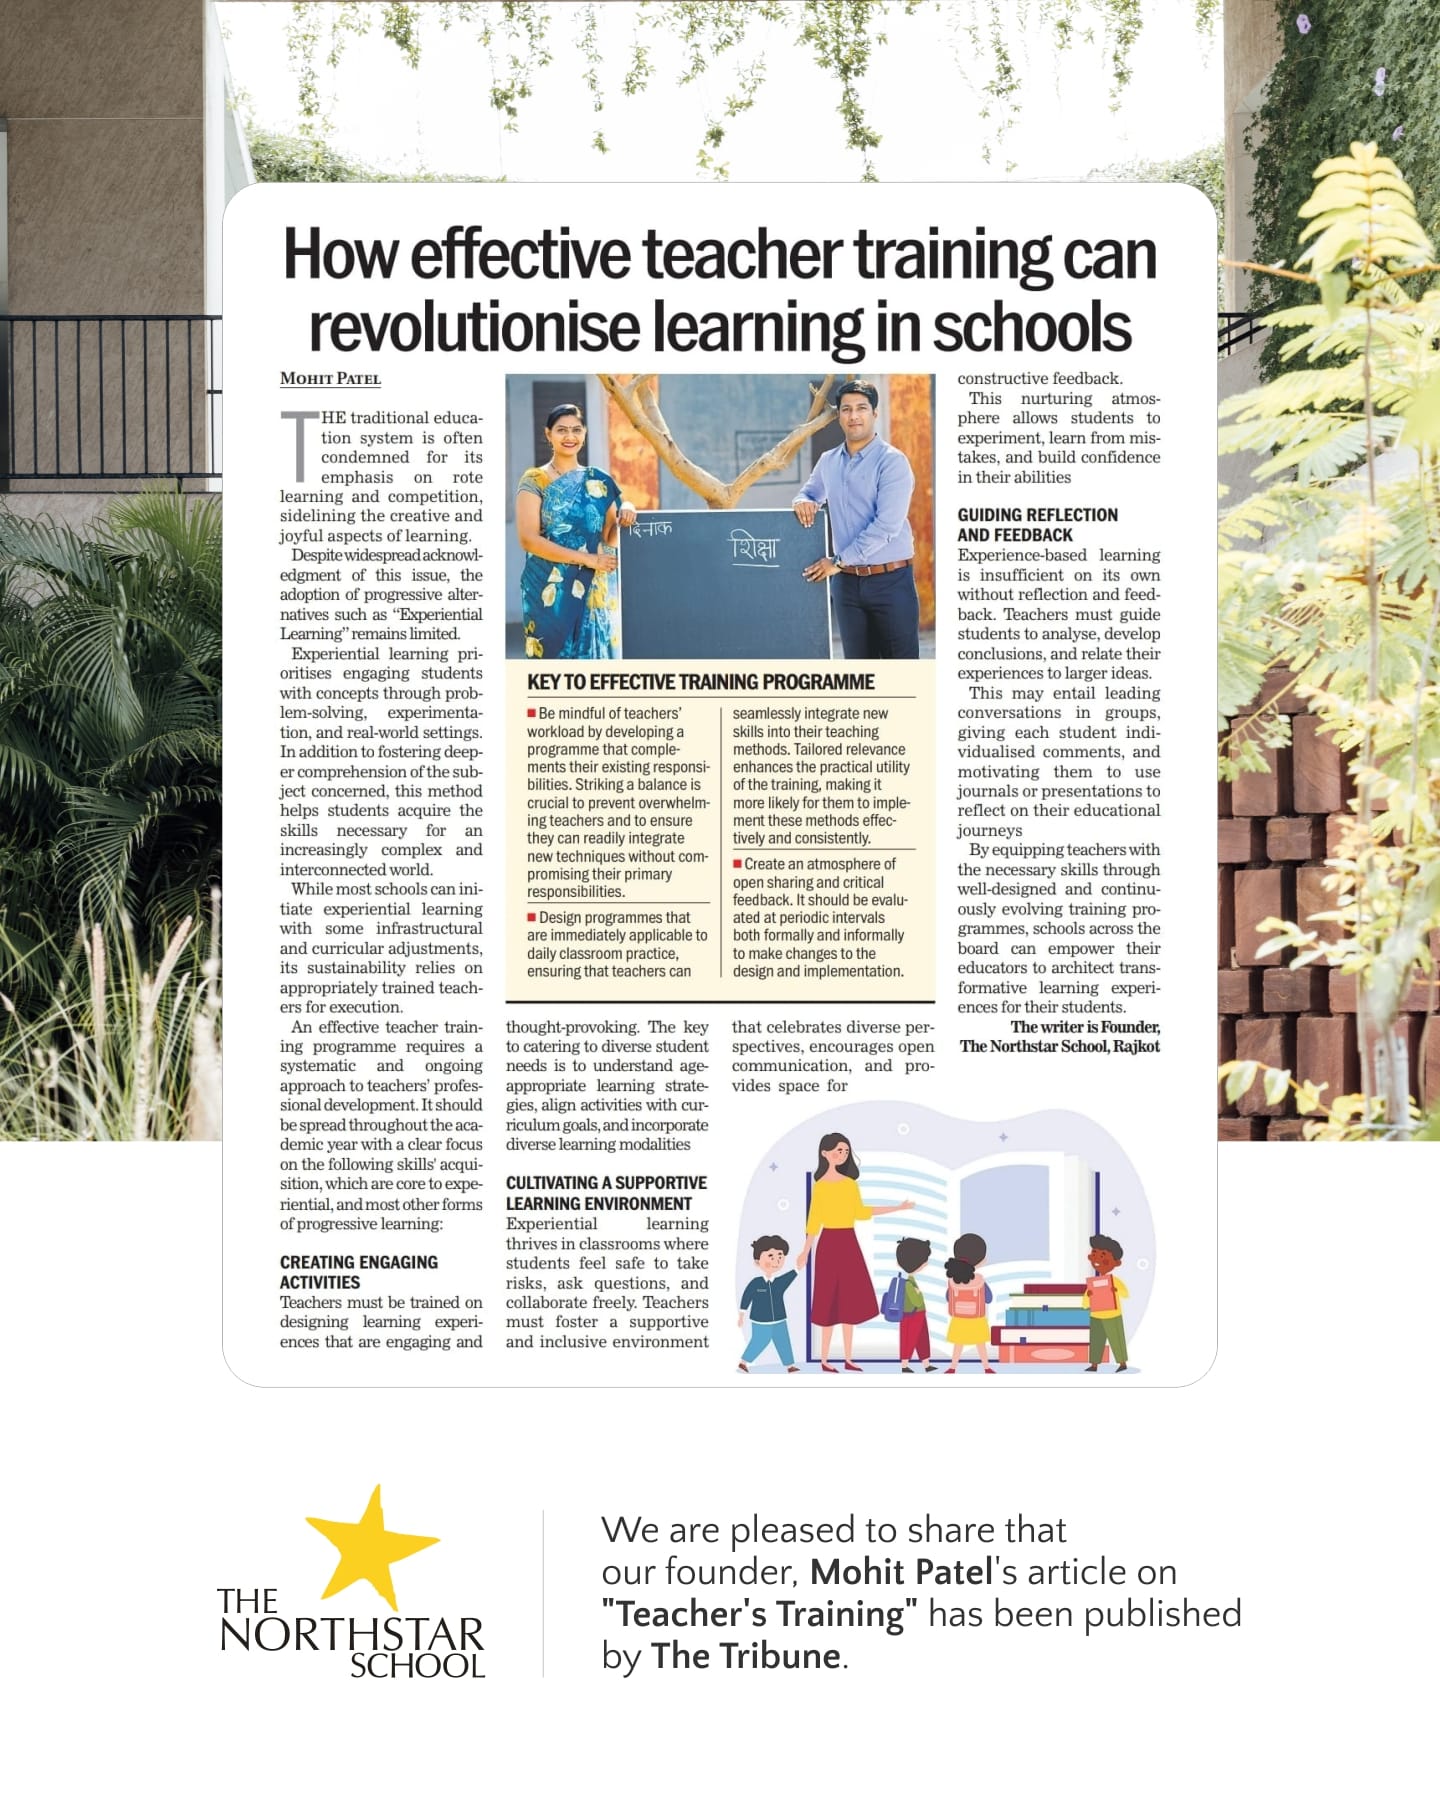 The Tribune has published our Founder's "teachers' training" article